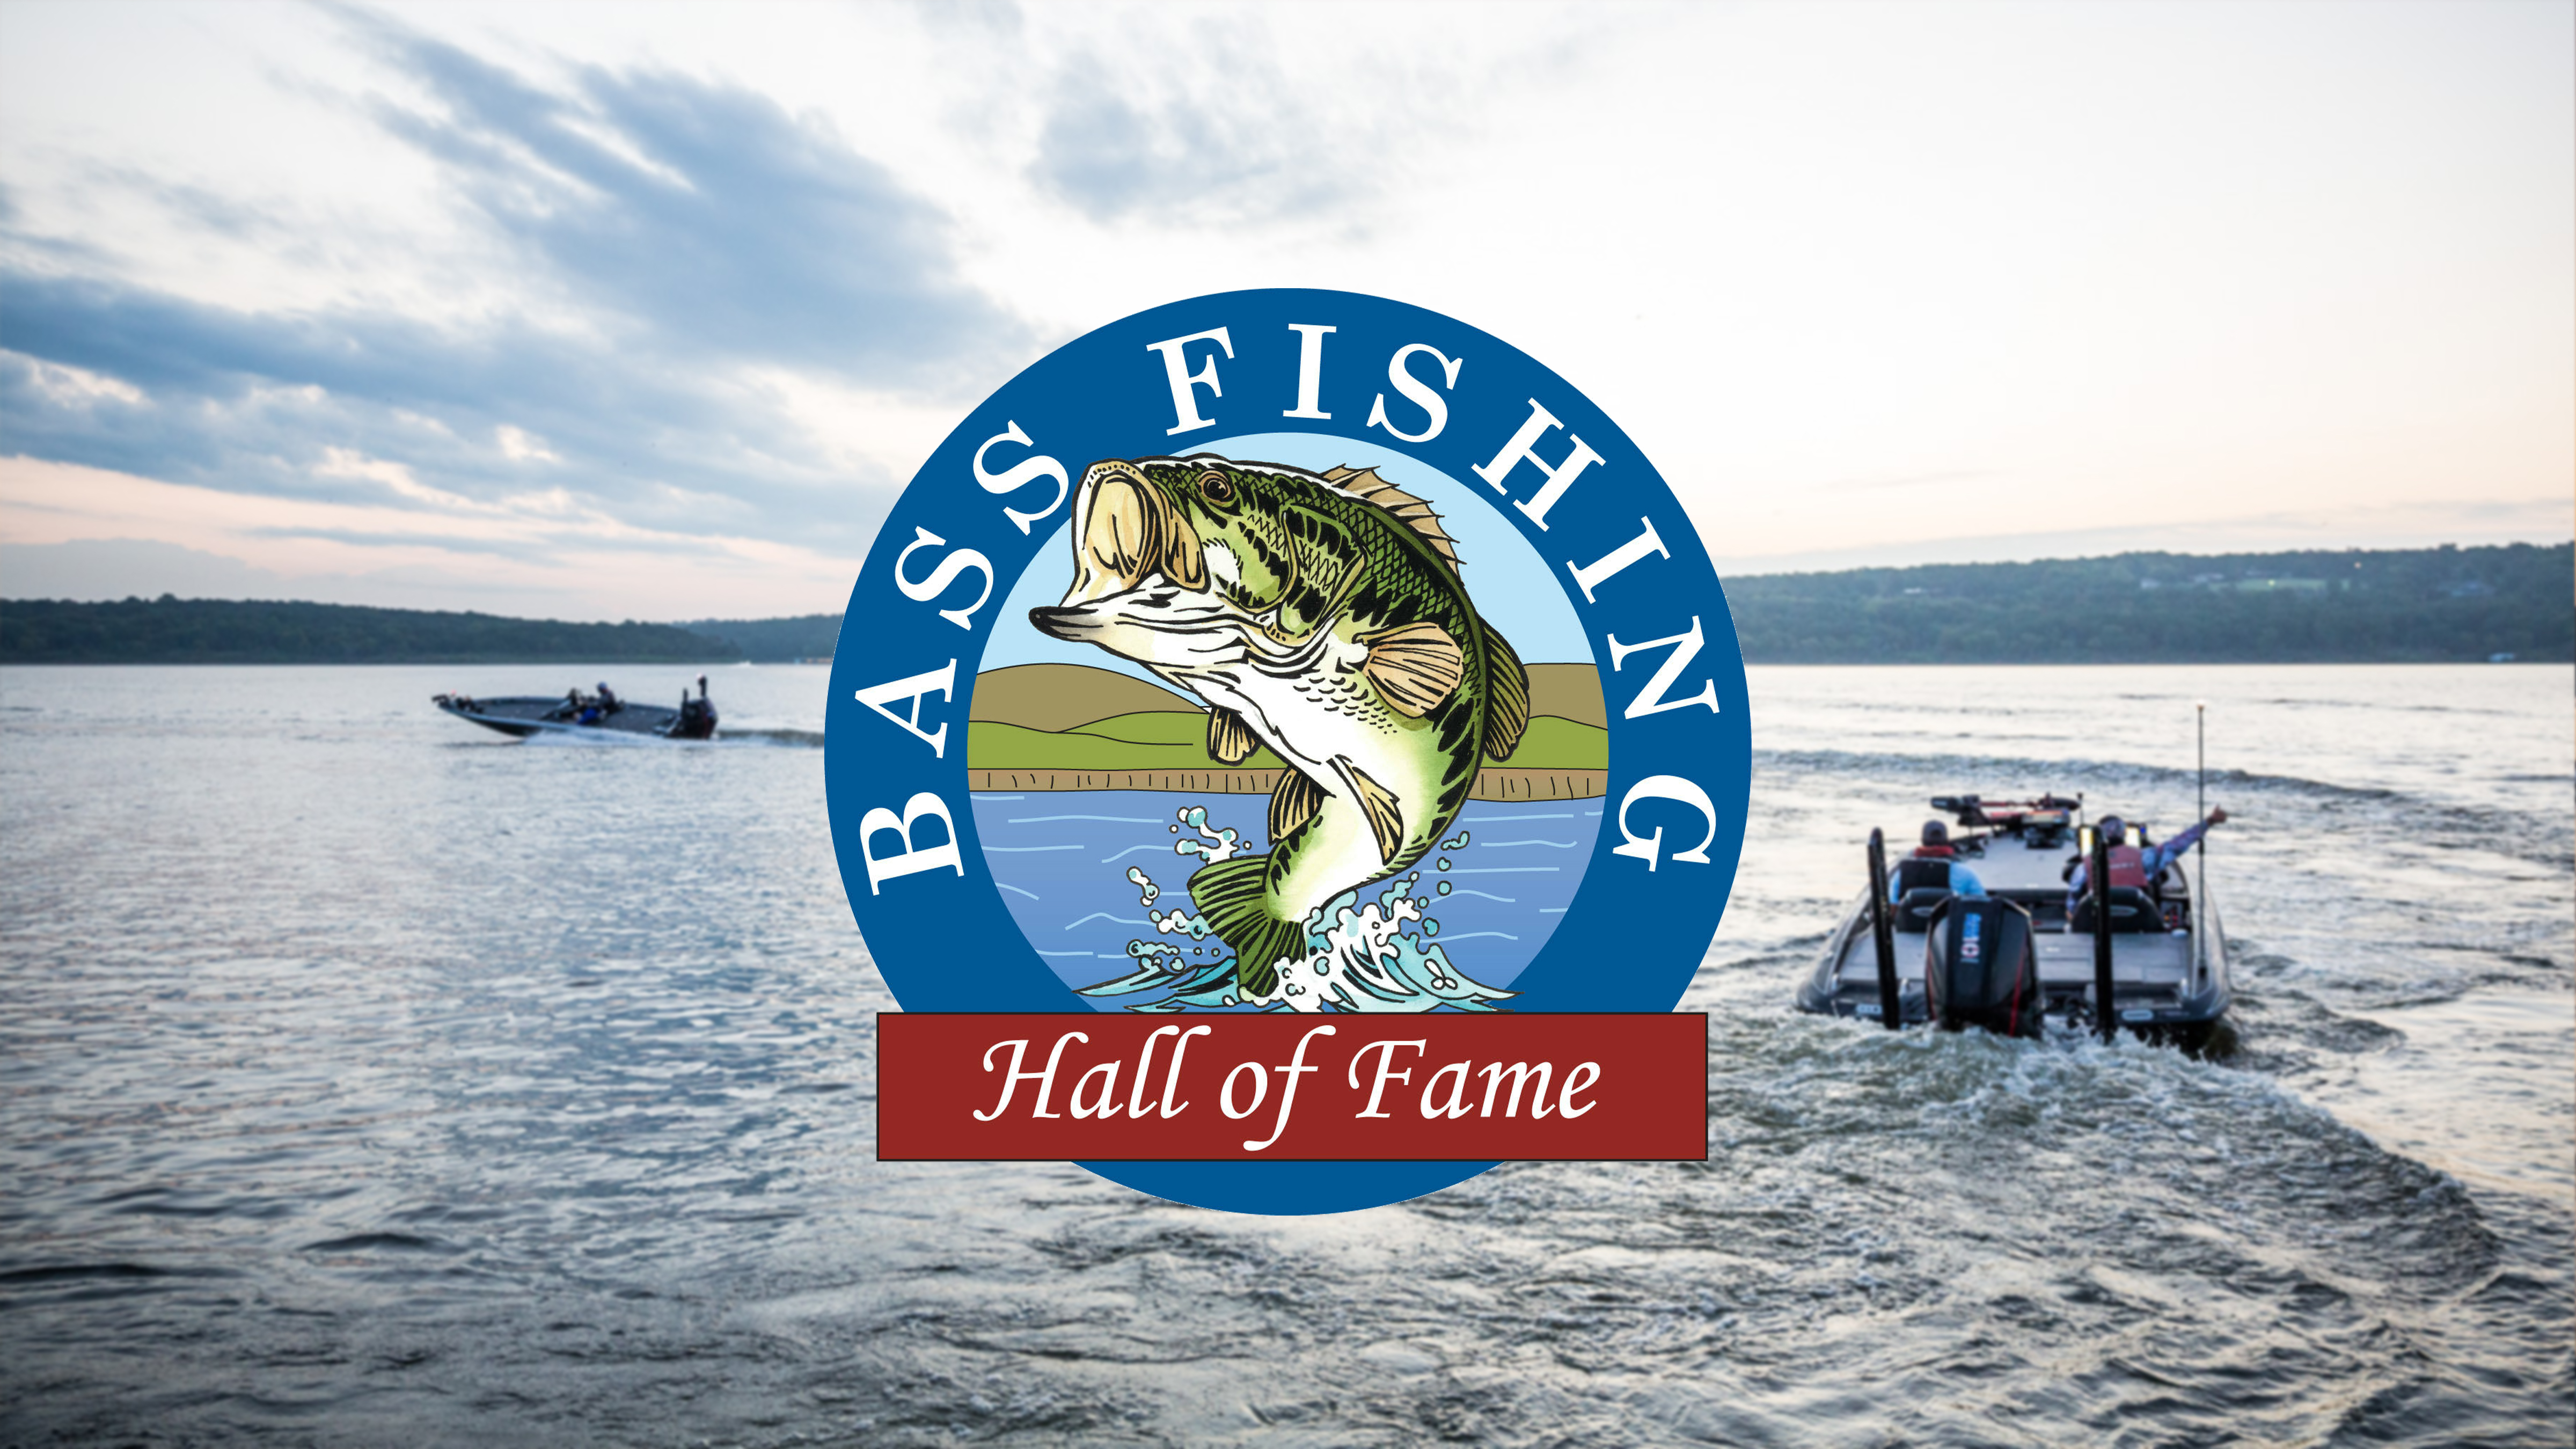 Annual Bass Fishing Hall of Fame Auction Goes Digital - Major League Fishing